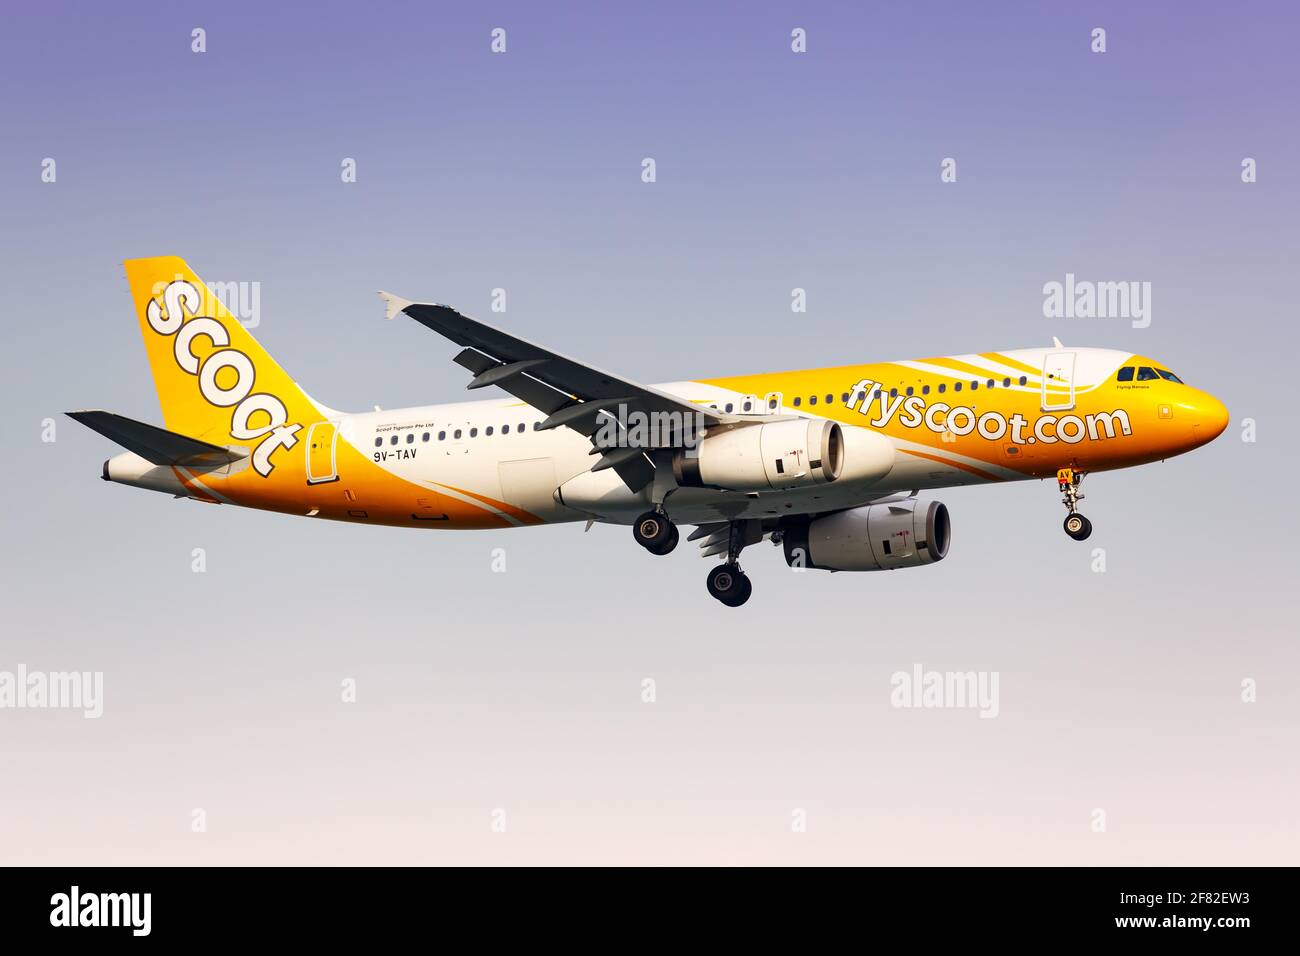 Changi, Singapore – January 29, 2018: Scoot Airbus A320 airplane at Changi airport (SIN) in Singapore. Airbus is a European aircraft manufacturer base Stock Photo